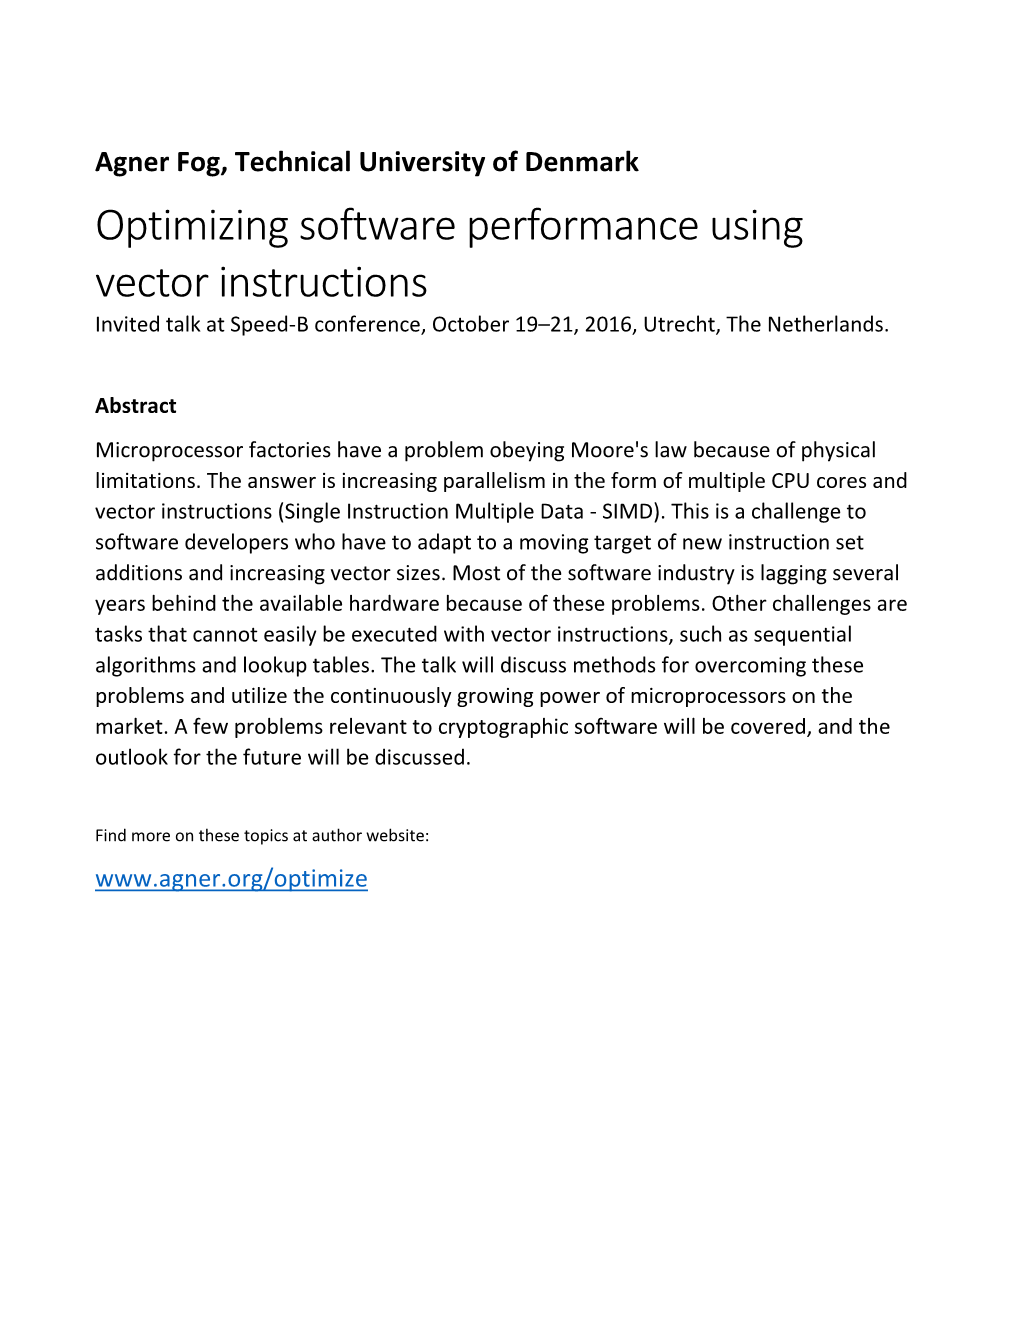 Optimizing Software Performance Using Vector Instructions Invited Talk at Speed-B Conference, October 19–21, 2016, Utrecht, the Netherlands